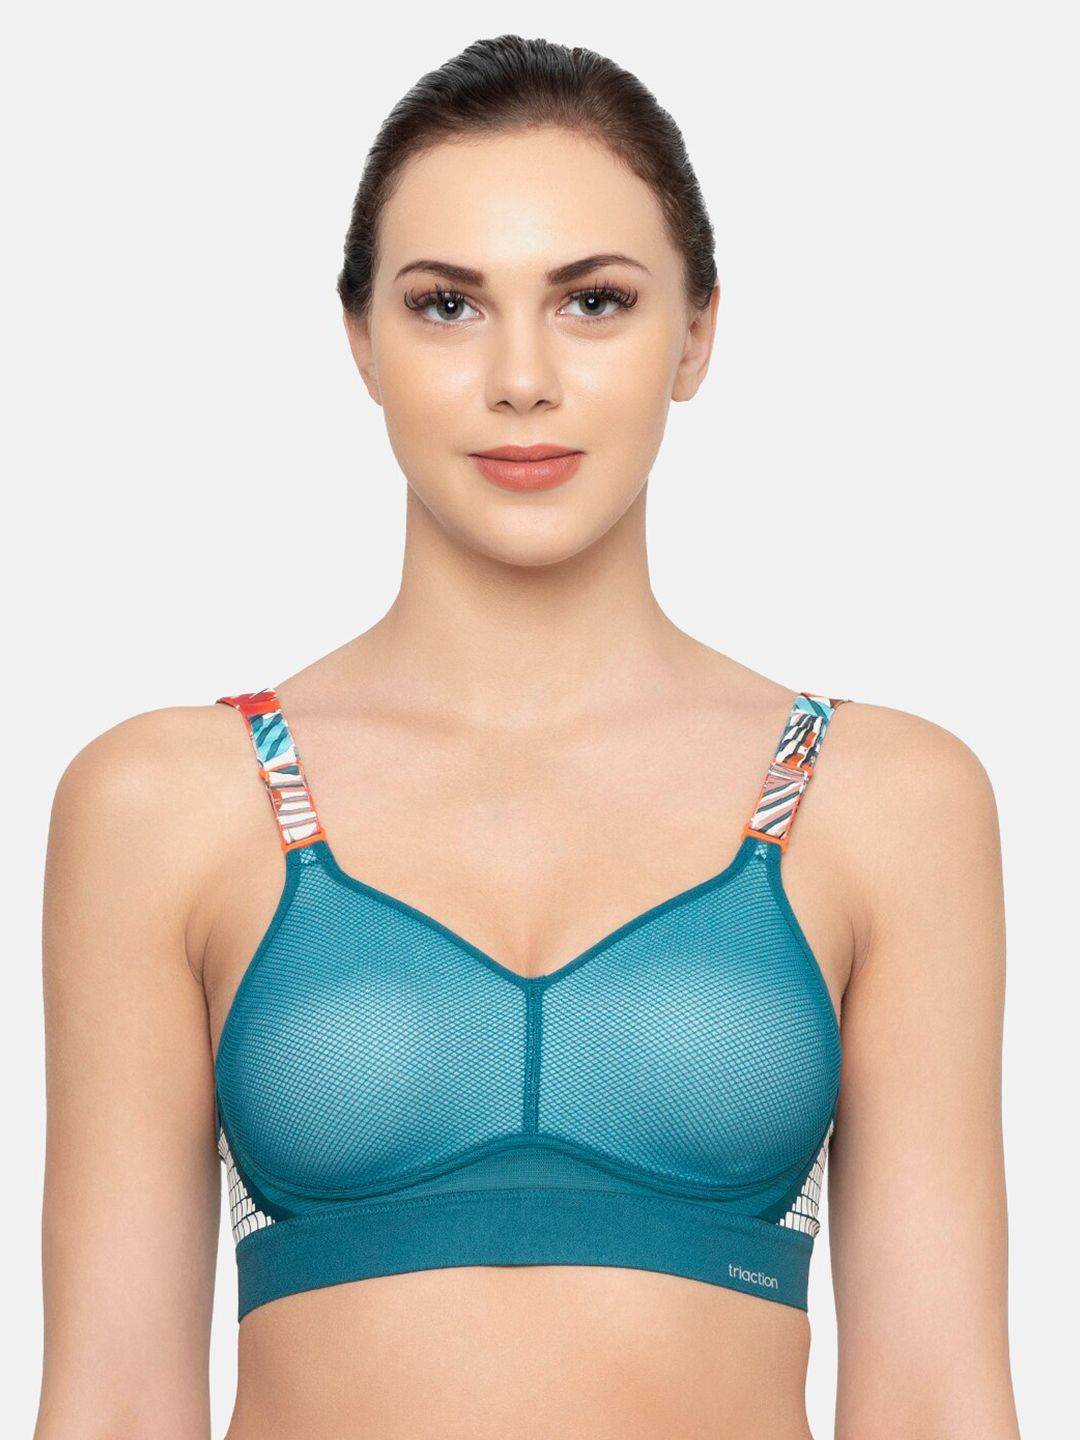 Triumph Triaction Hybrid Lite Padded Wireless High Bounce Control Sports Bra Price in India